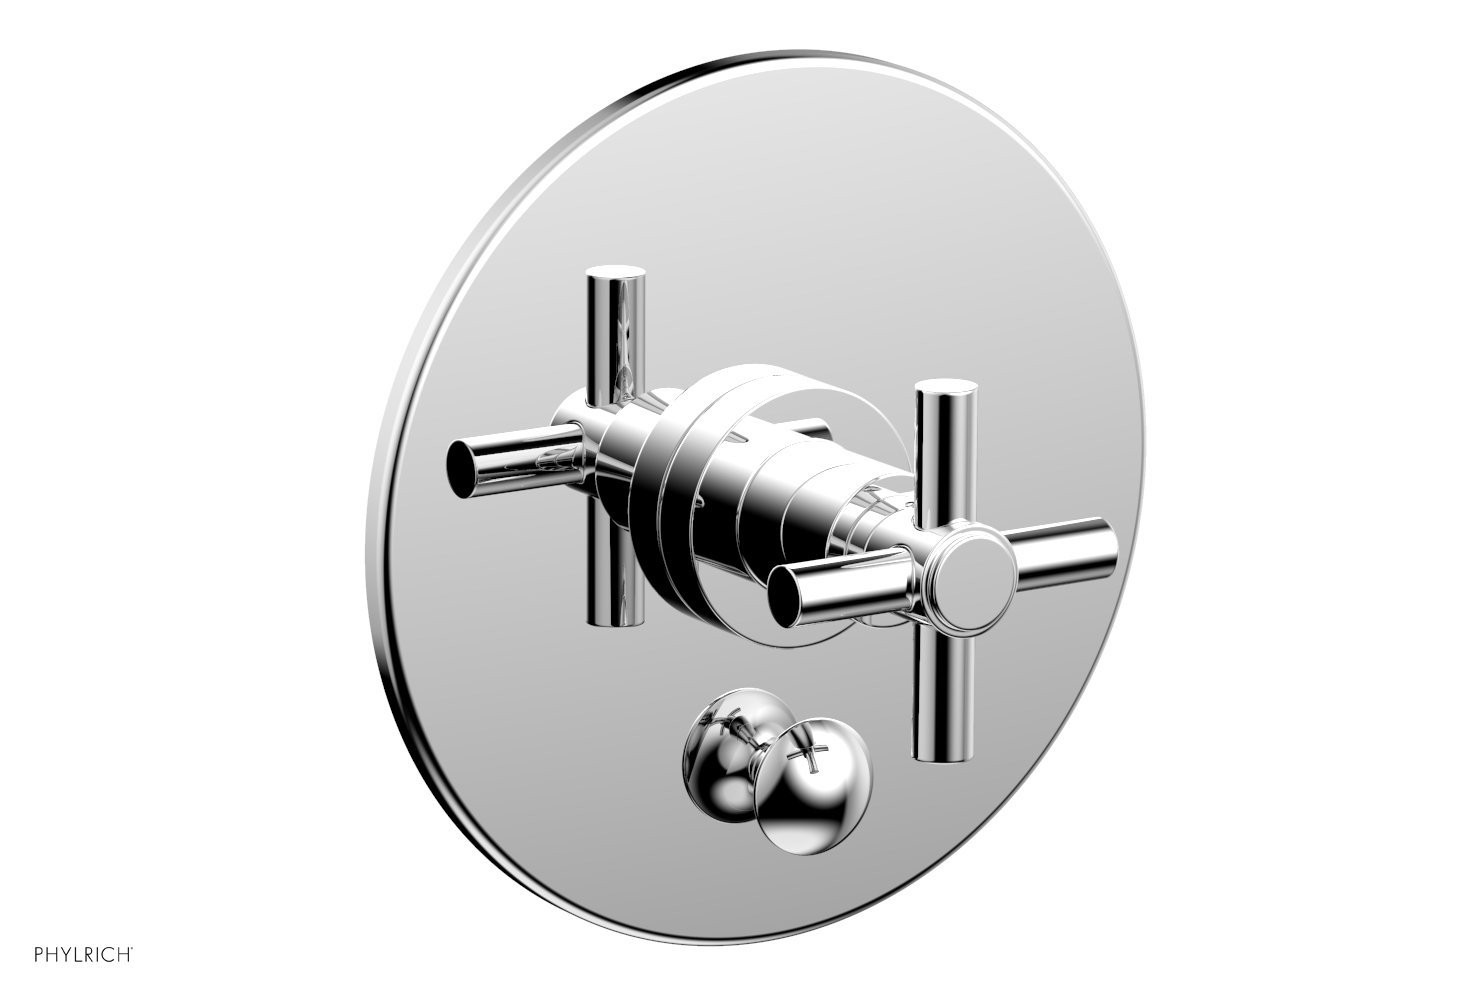 PHYLRICH DPB2134TO BASIC PRESSURE BALANCE SHOWER PLATE WITH DIVERTER AND LEVER HANDLE TRIM